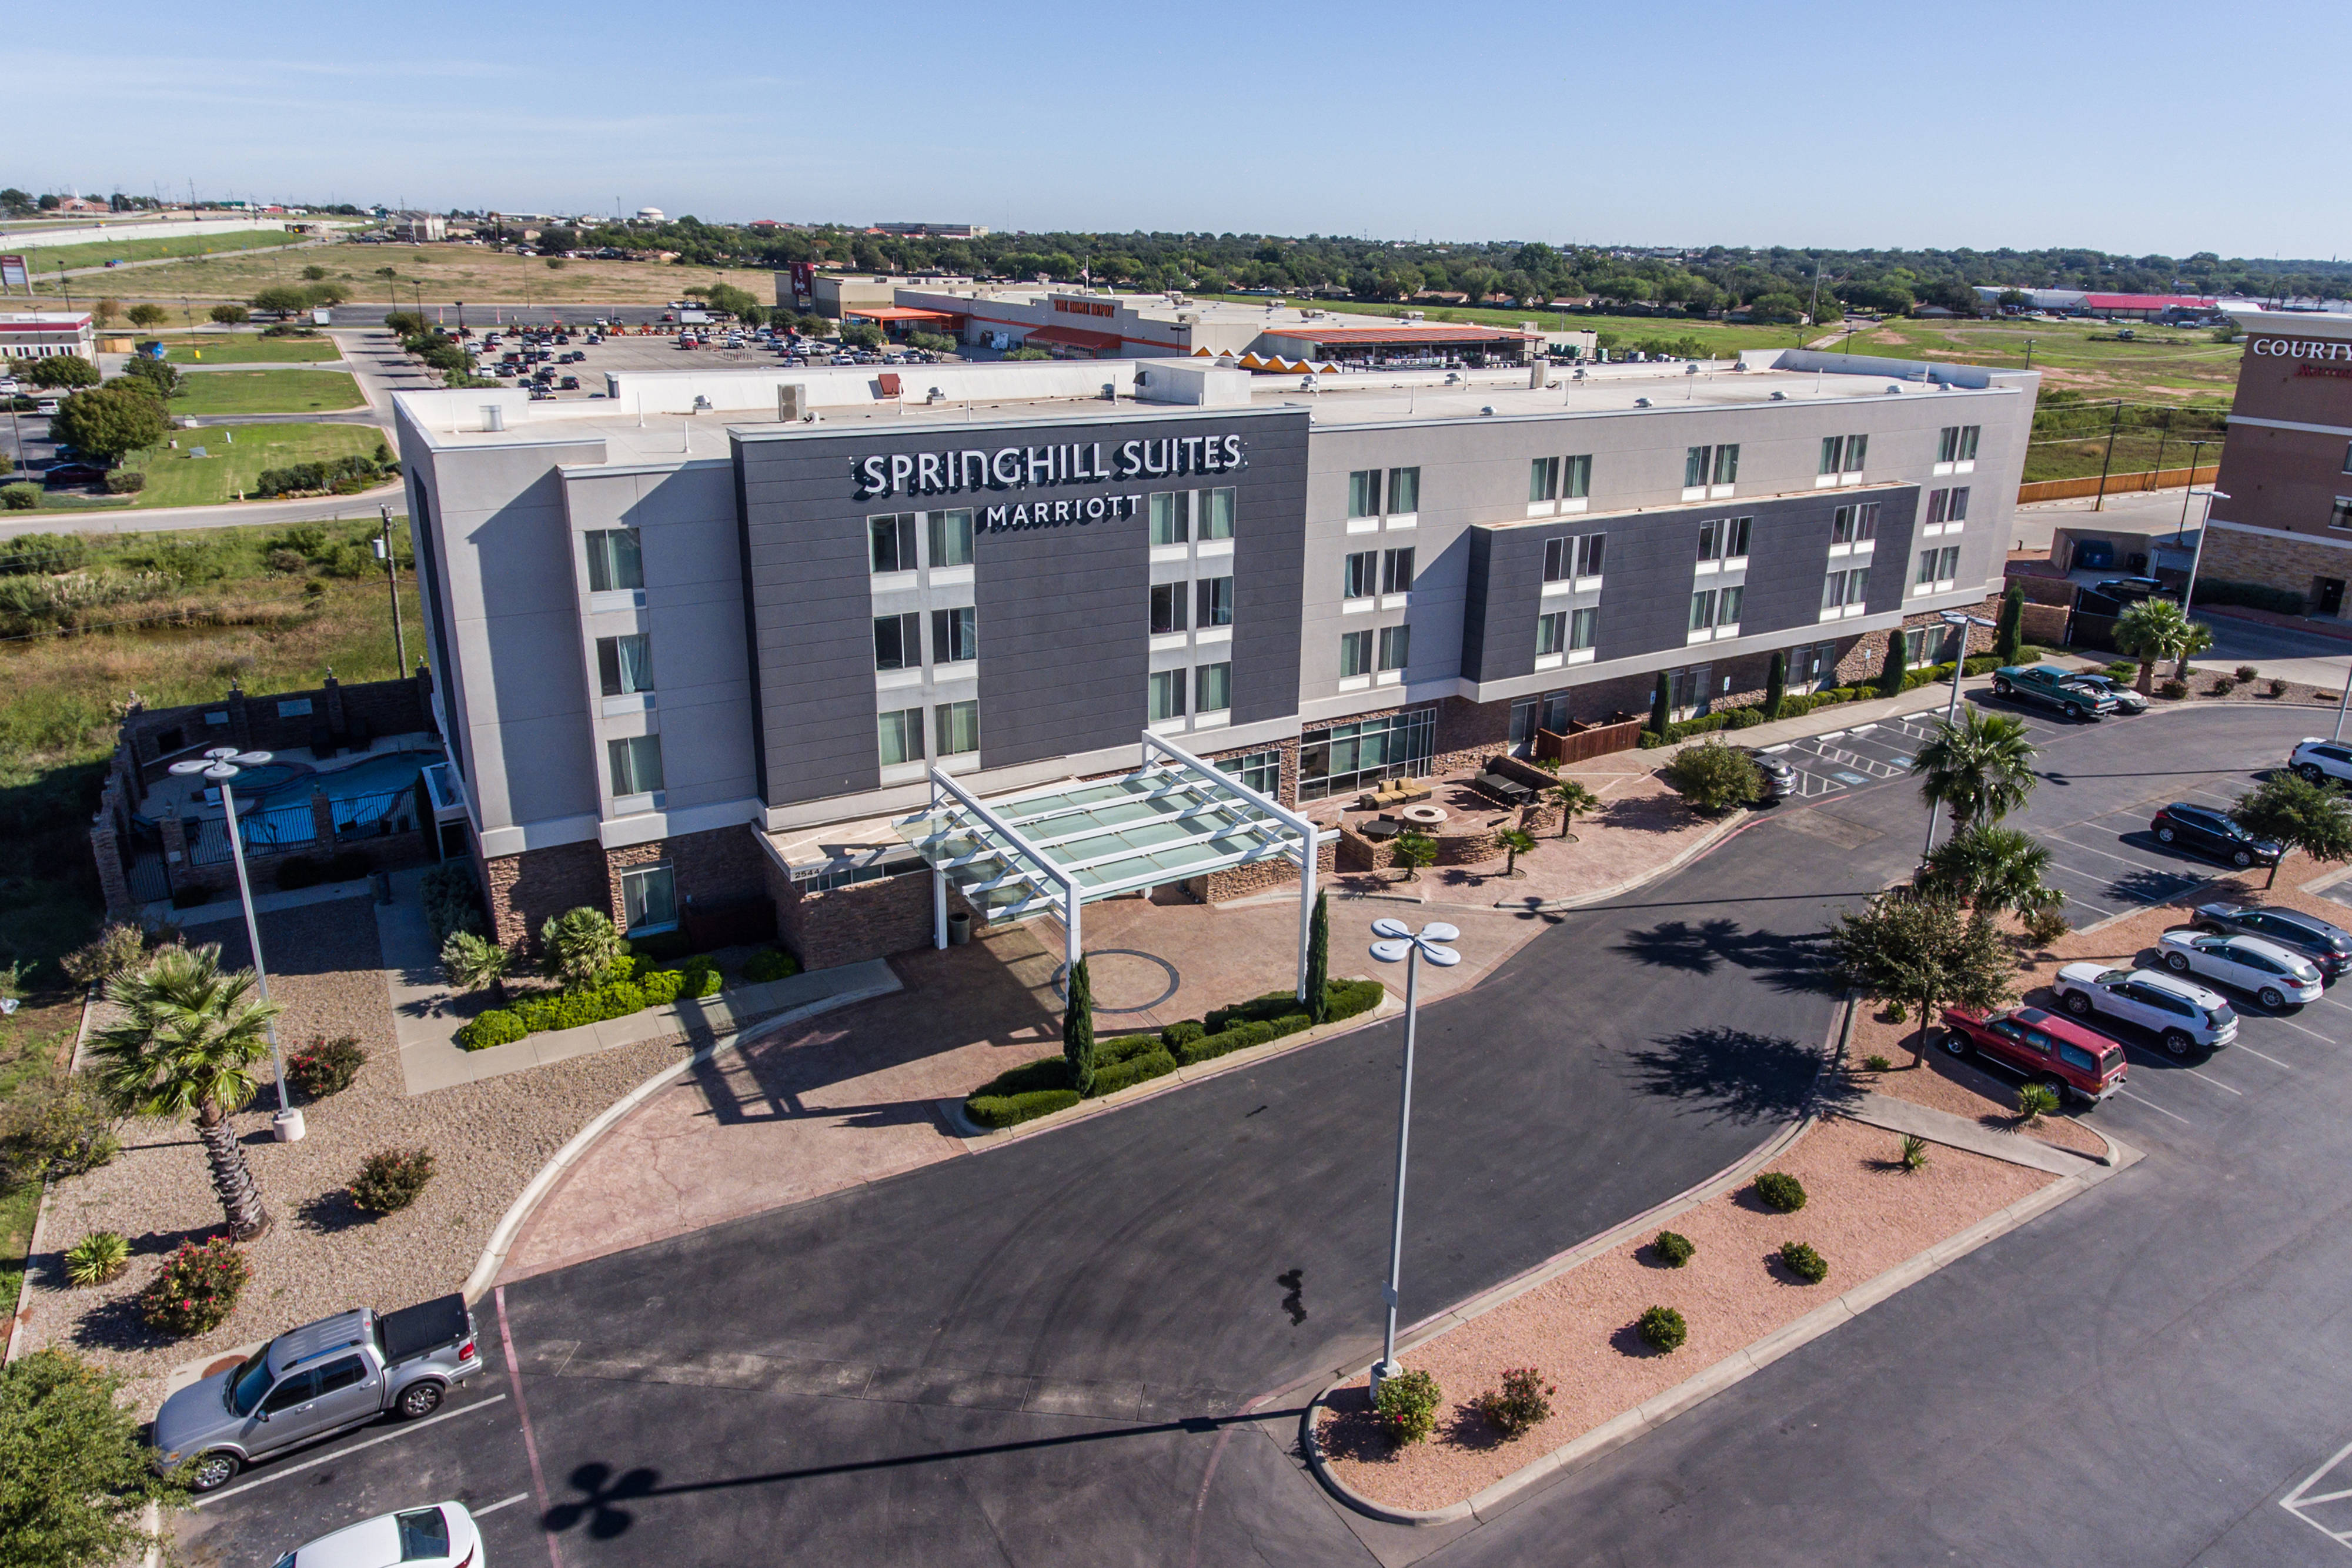 Photo of SpringHill Suites San Angelo, San Angelo, TX